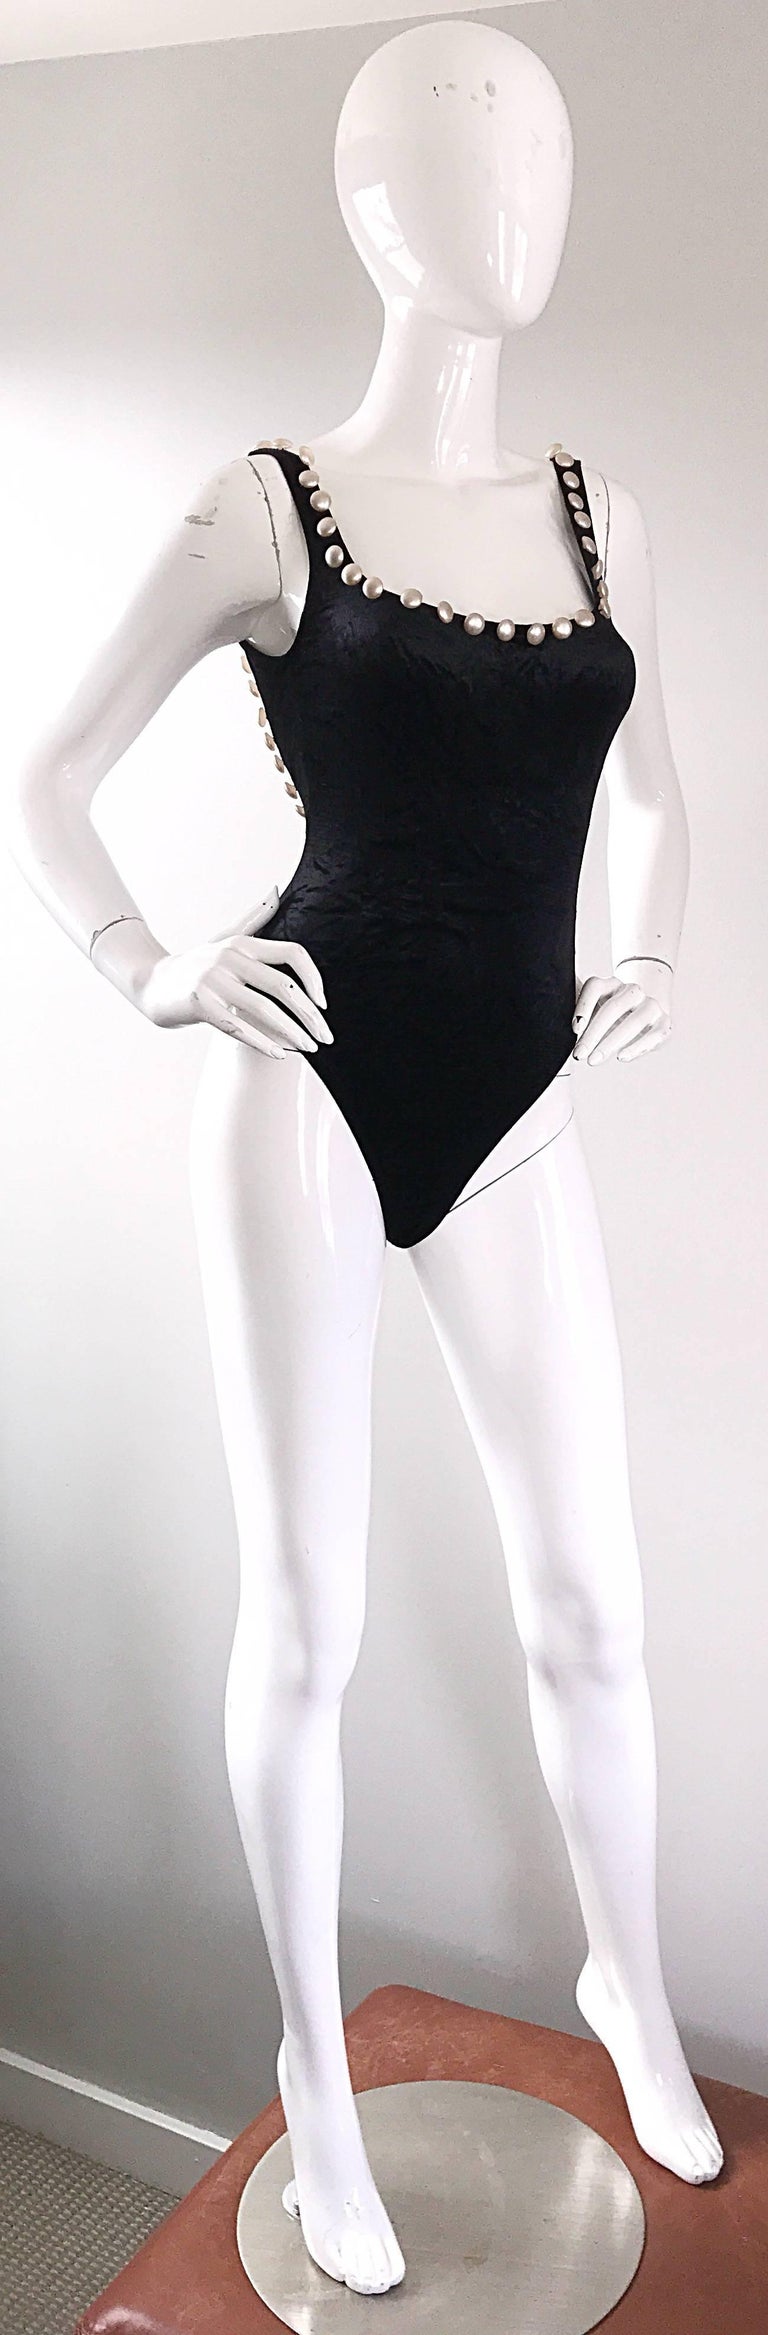 Sexy 90s MOSCHINO black velour bodysuit, encrusted with white pearls! Features a soft crushed velour that stretches to fit. Flat headed pearls adorn the top portion on the front and back. Can be worn as a bodysuit or a one piece swimsuit. Great with